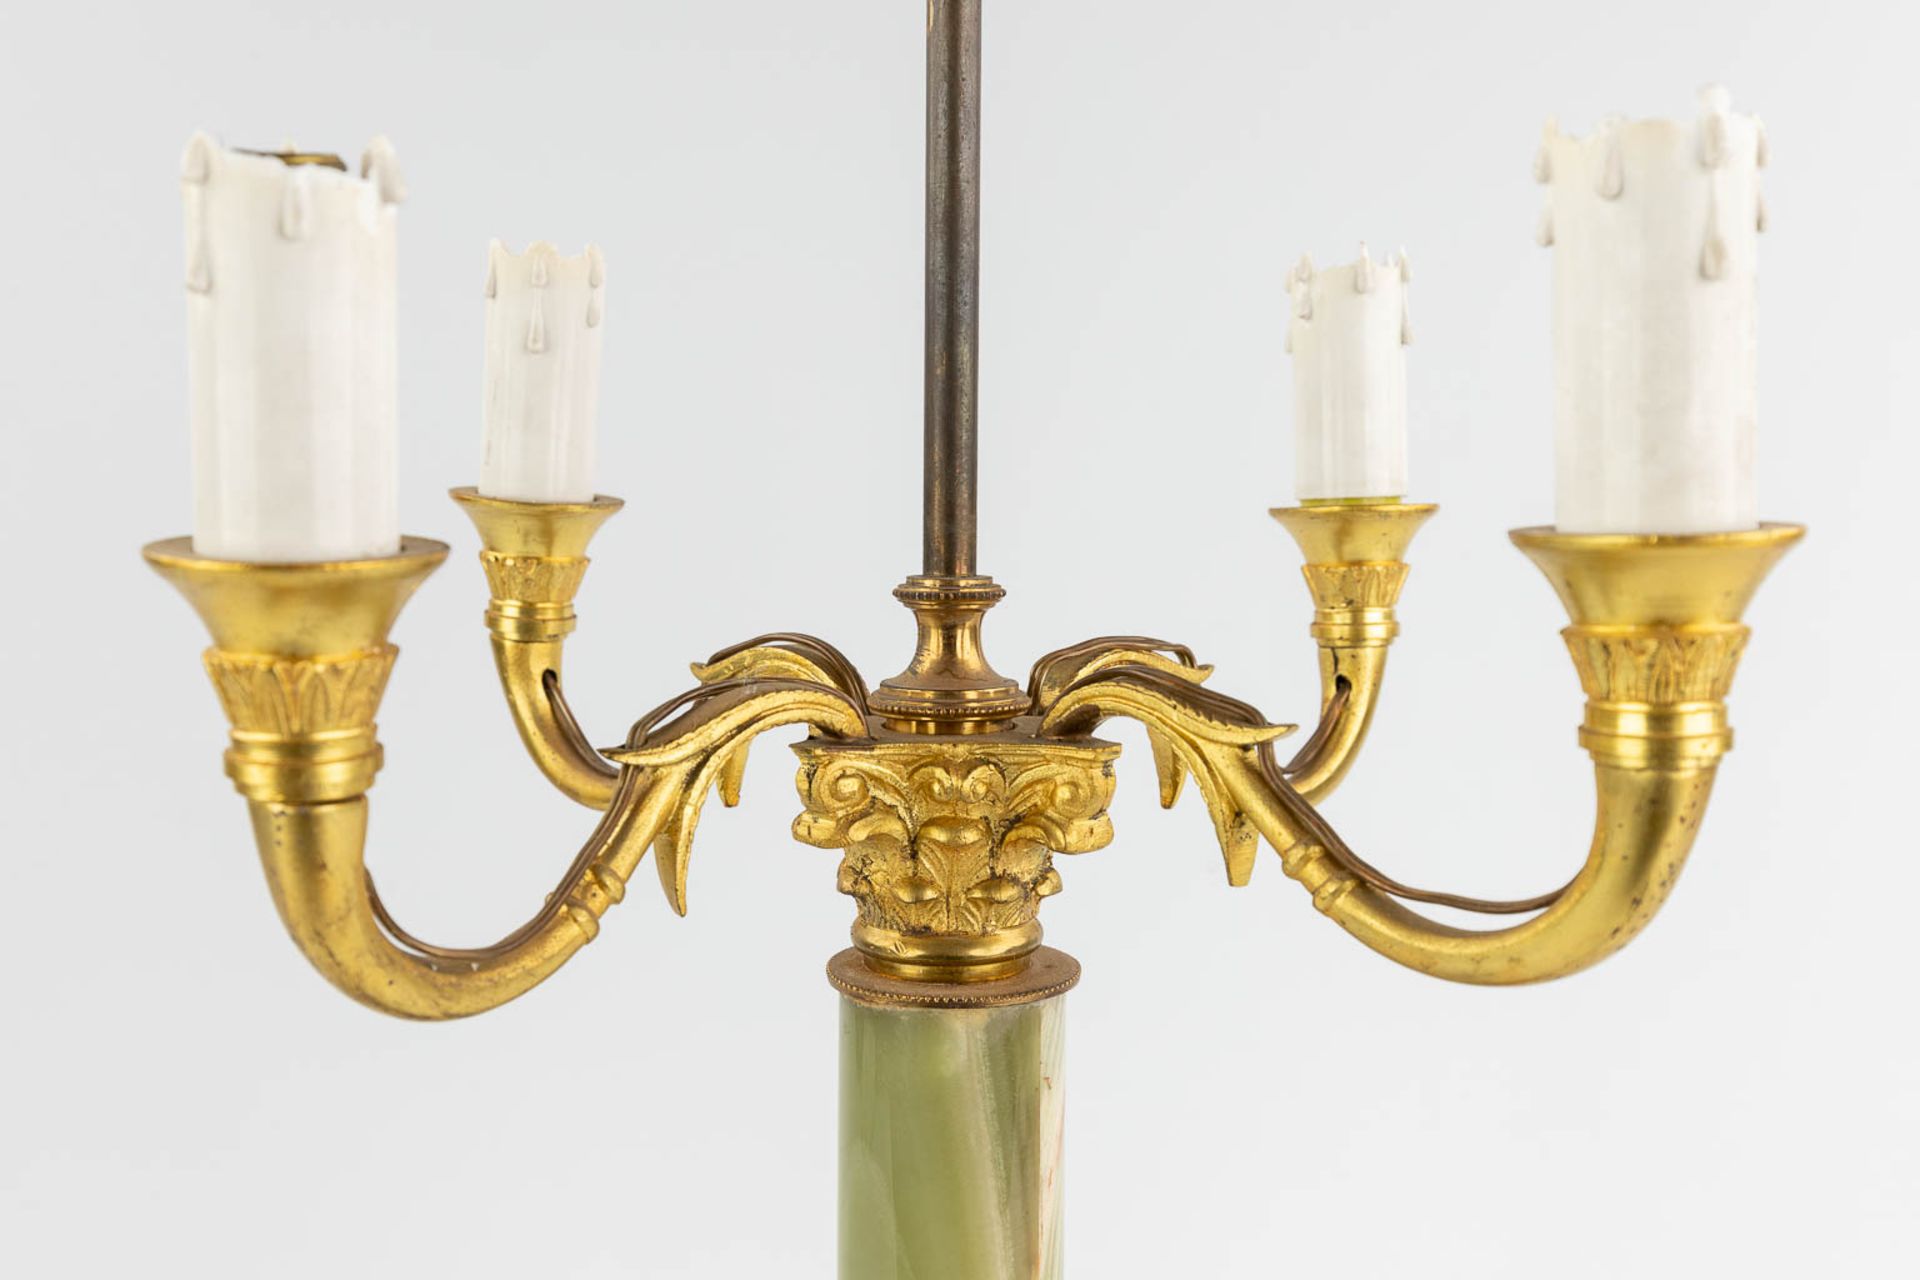 A table lamp, brass and onyx. 20th century. (L: 30 x W: 30 x H: 77 cm) - Image 10 of 13